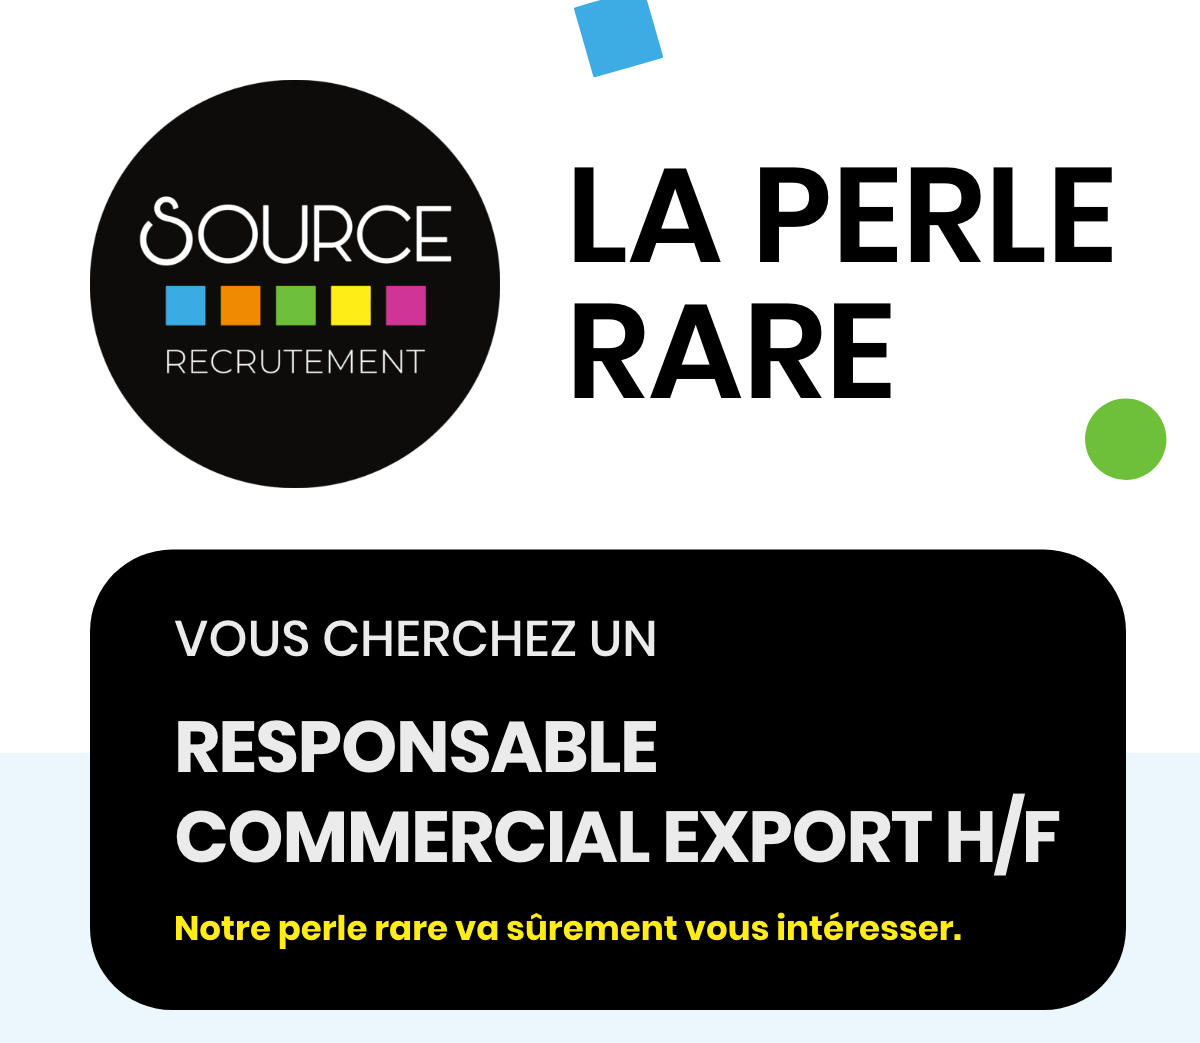 Responsable commercial export H/F